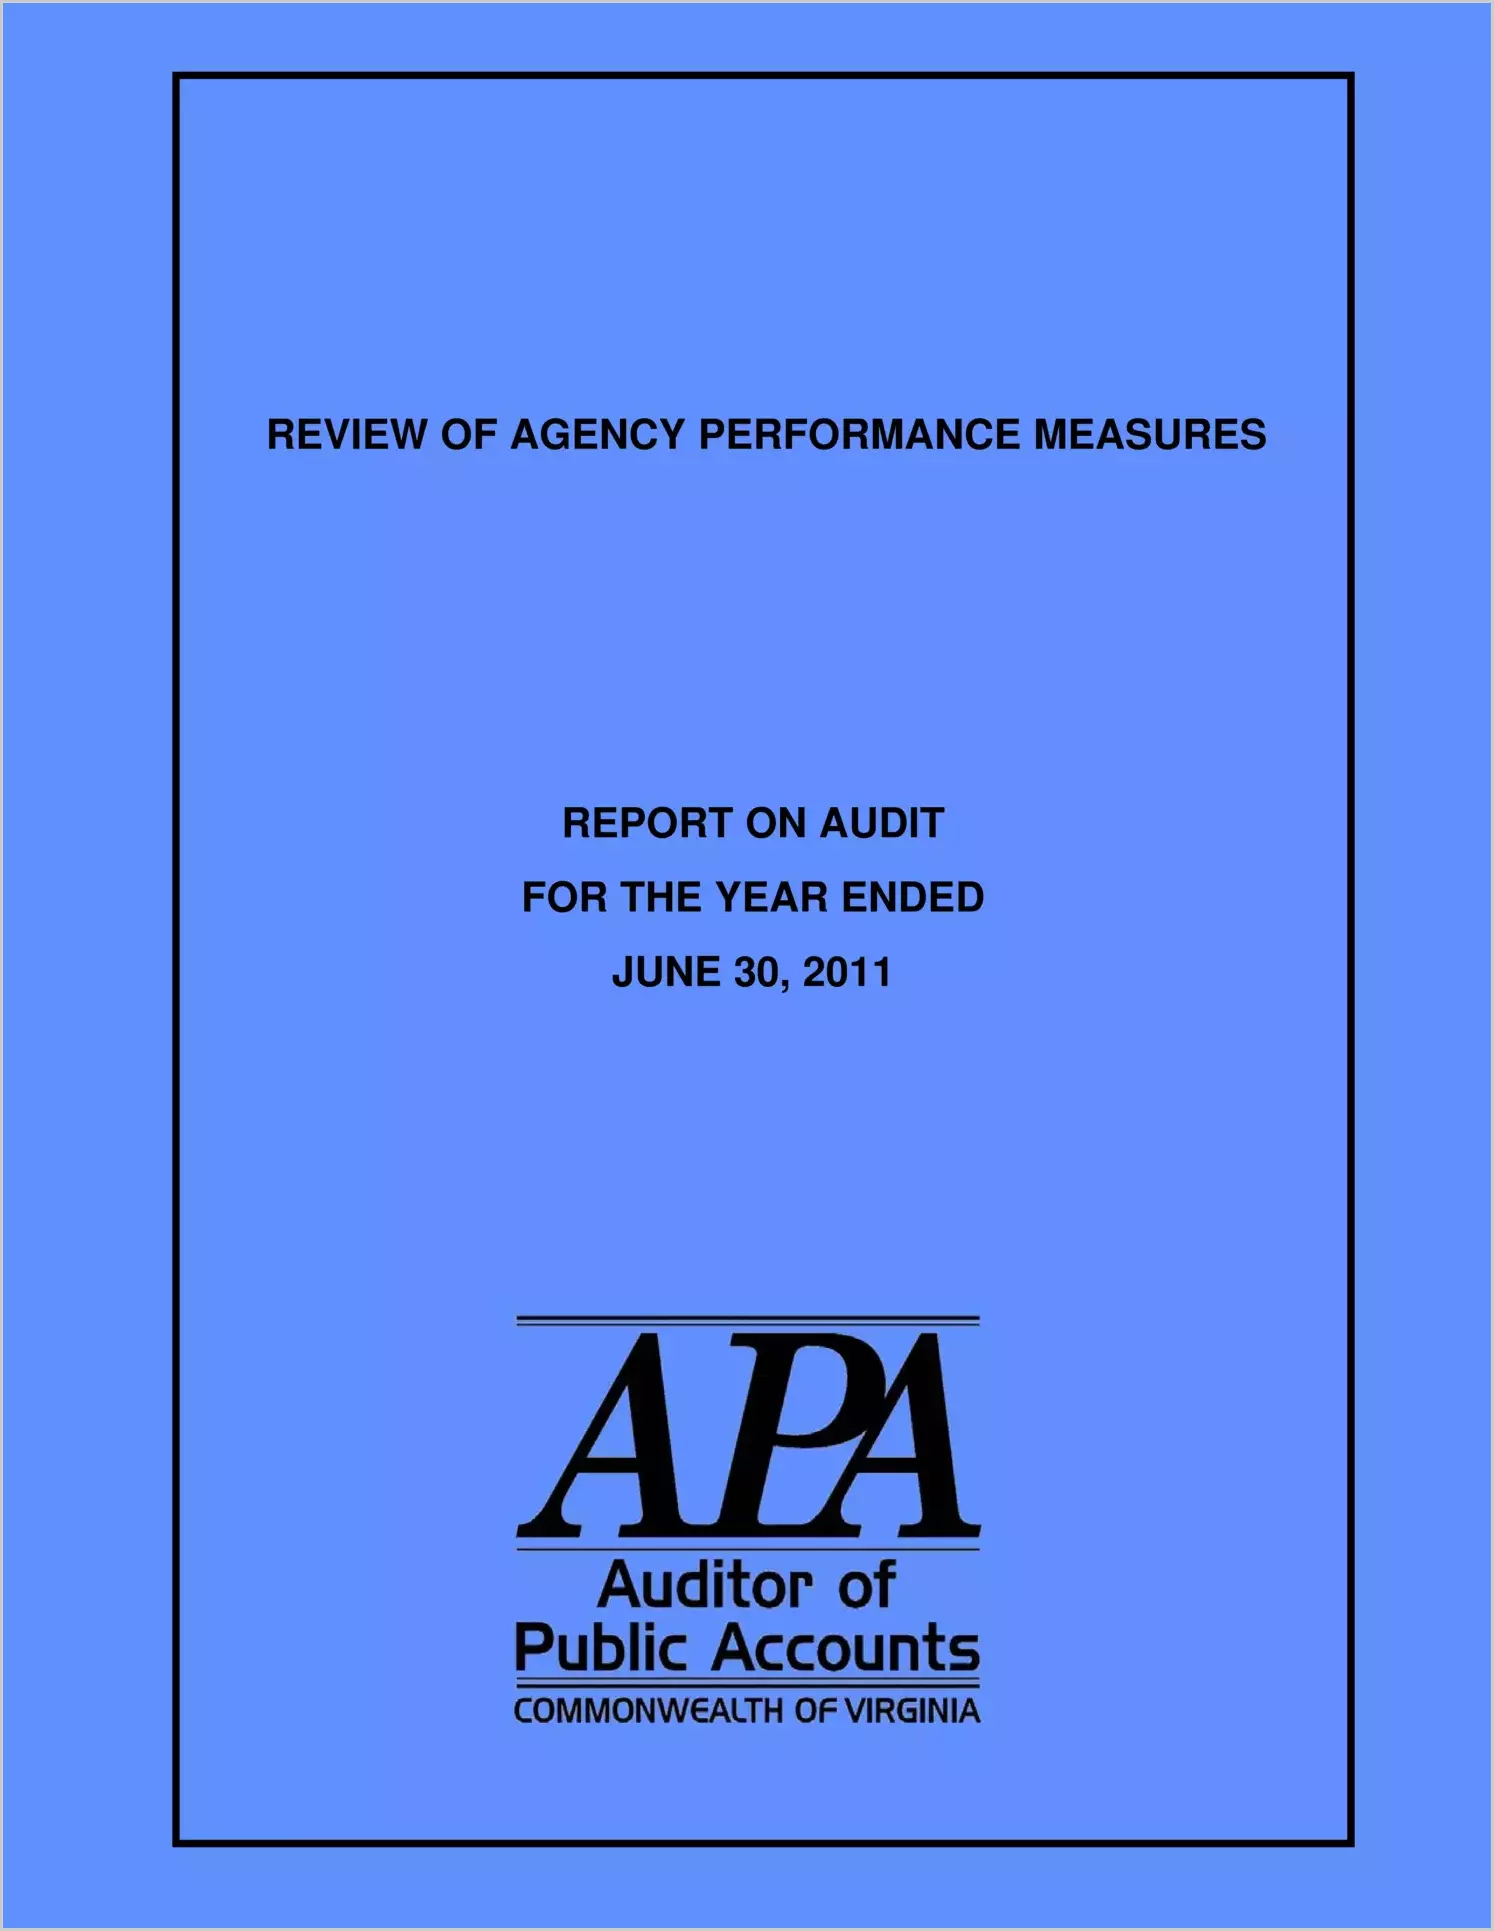 Review of Agency Performance Measures report on Audit for the year ended June 30, 2011